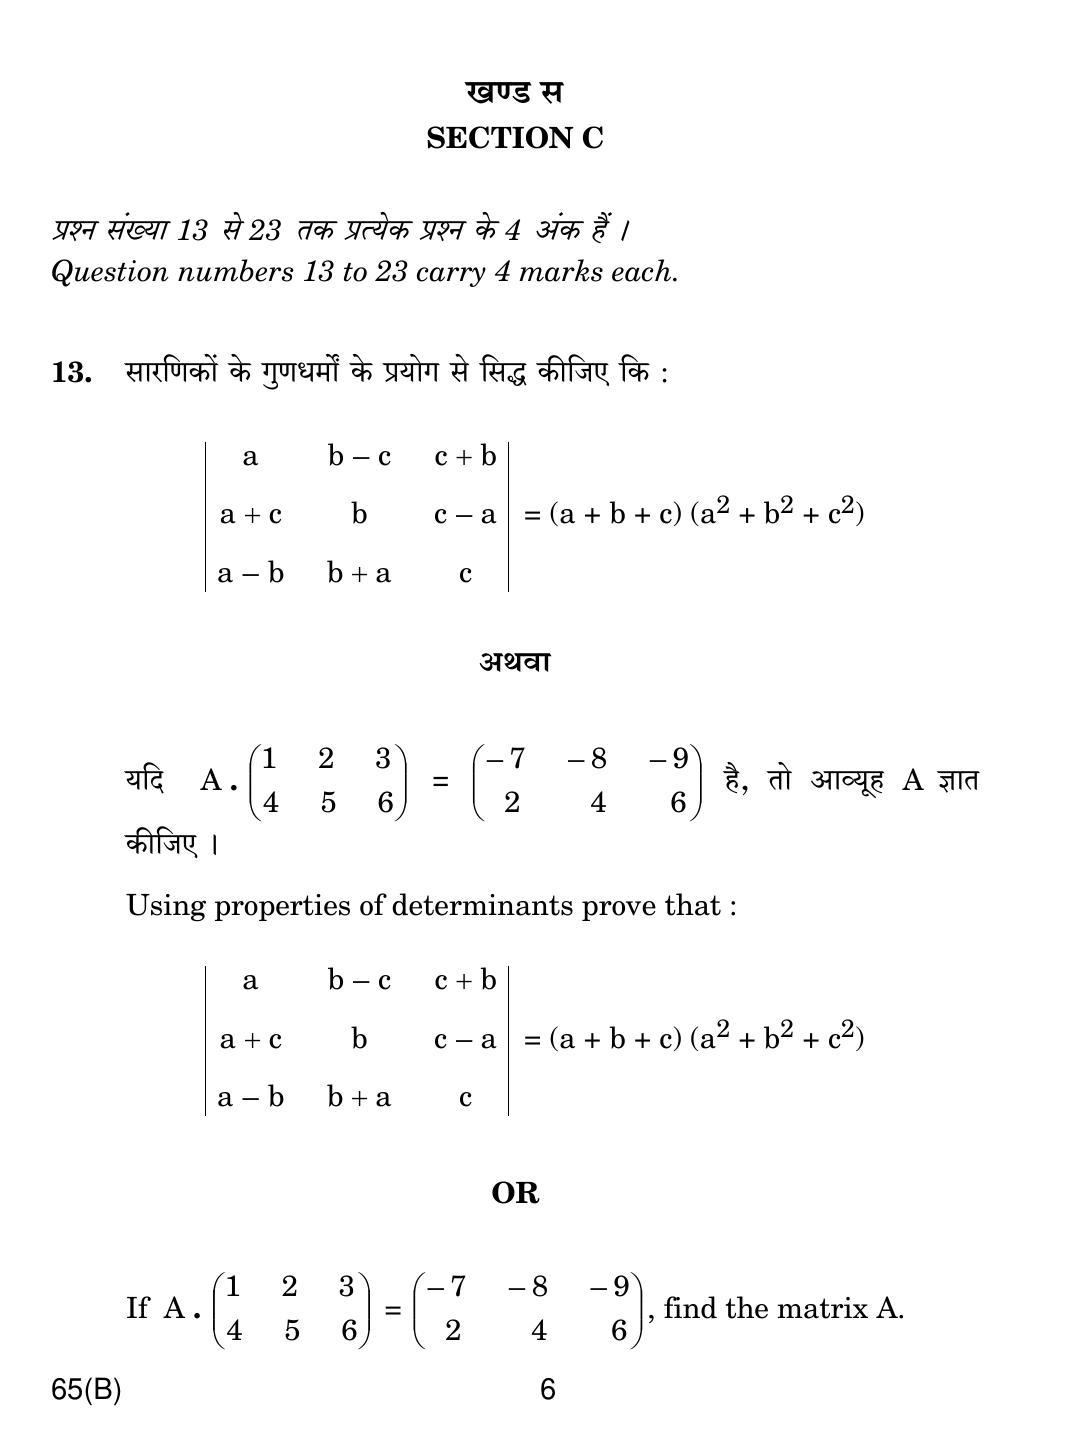 CBSE Class 12 65(B) MATHS FOR BLIND CANDIDATES 2018 Question Paper - Page 6